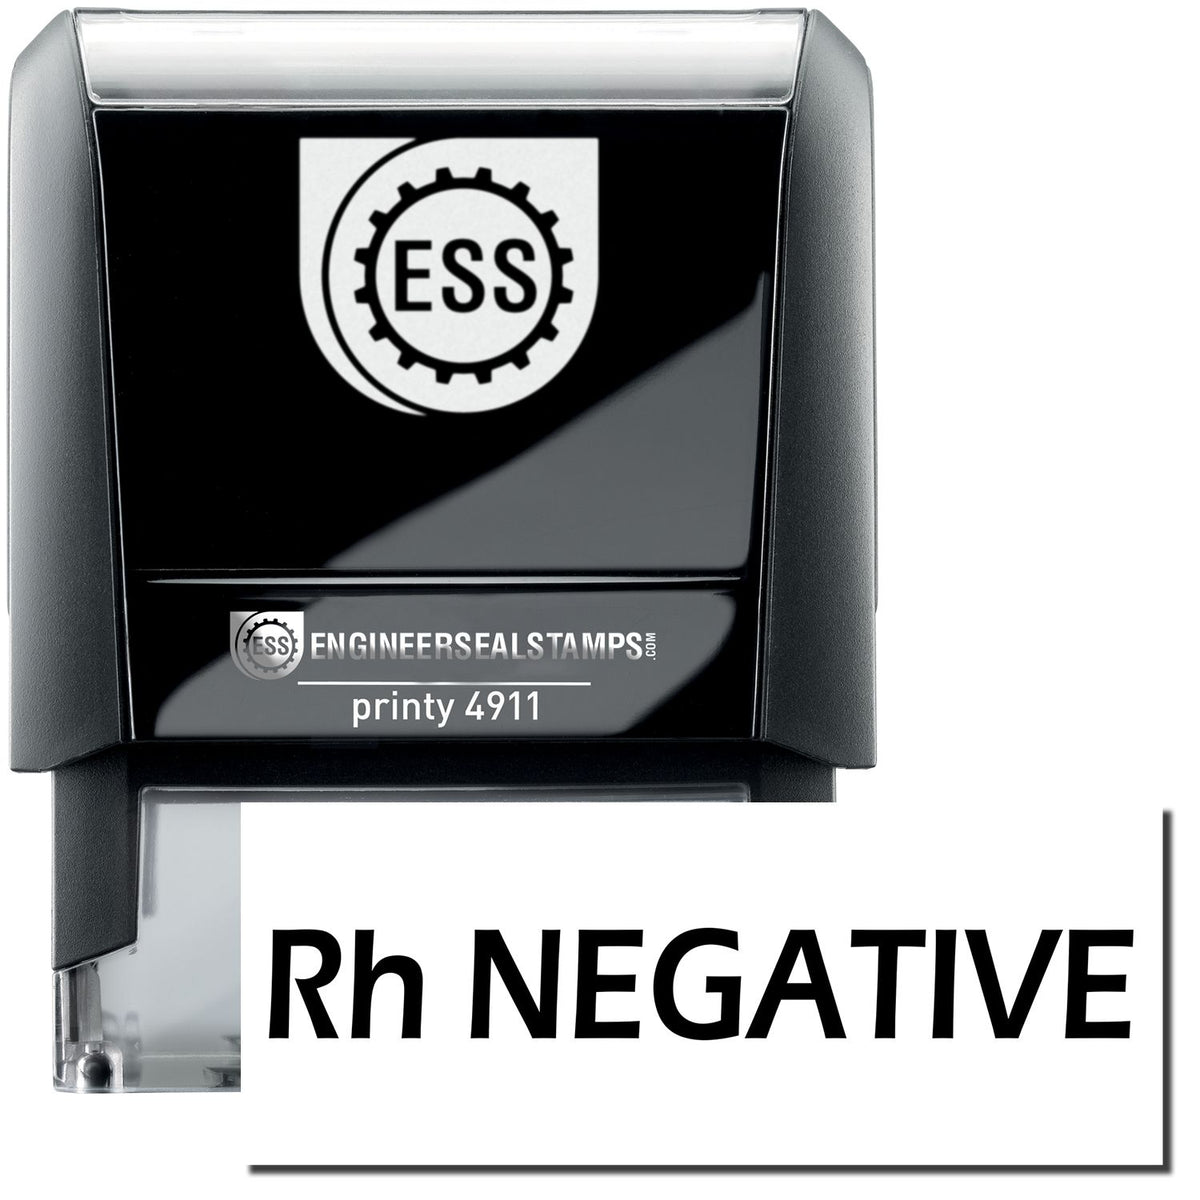 A self-inking stamp with a stamped image showing how the text &quot;Rh NEGATIVE&quot; is displayed after stamping.